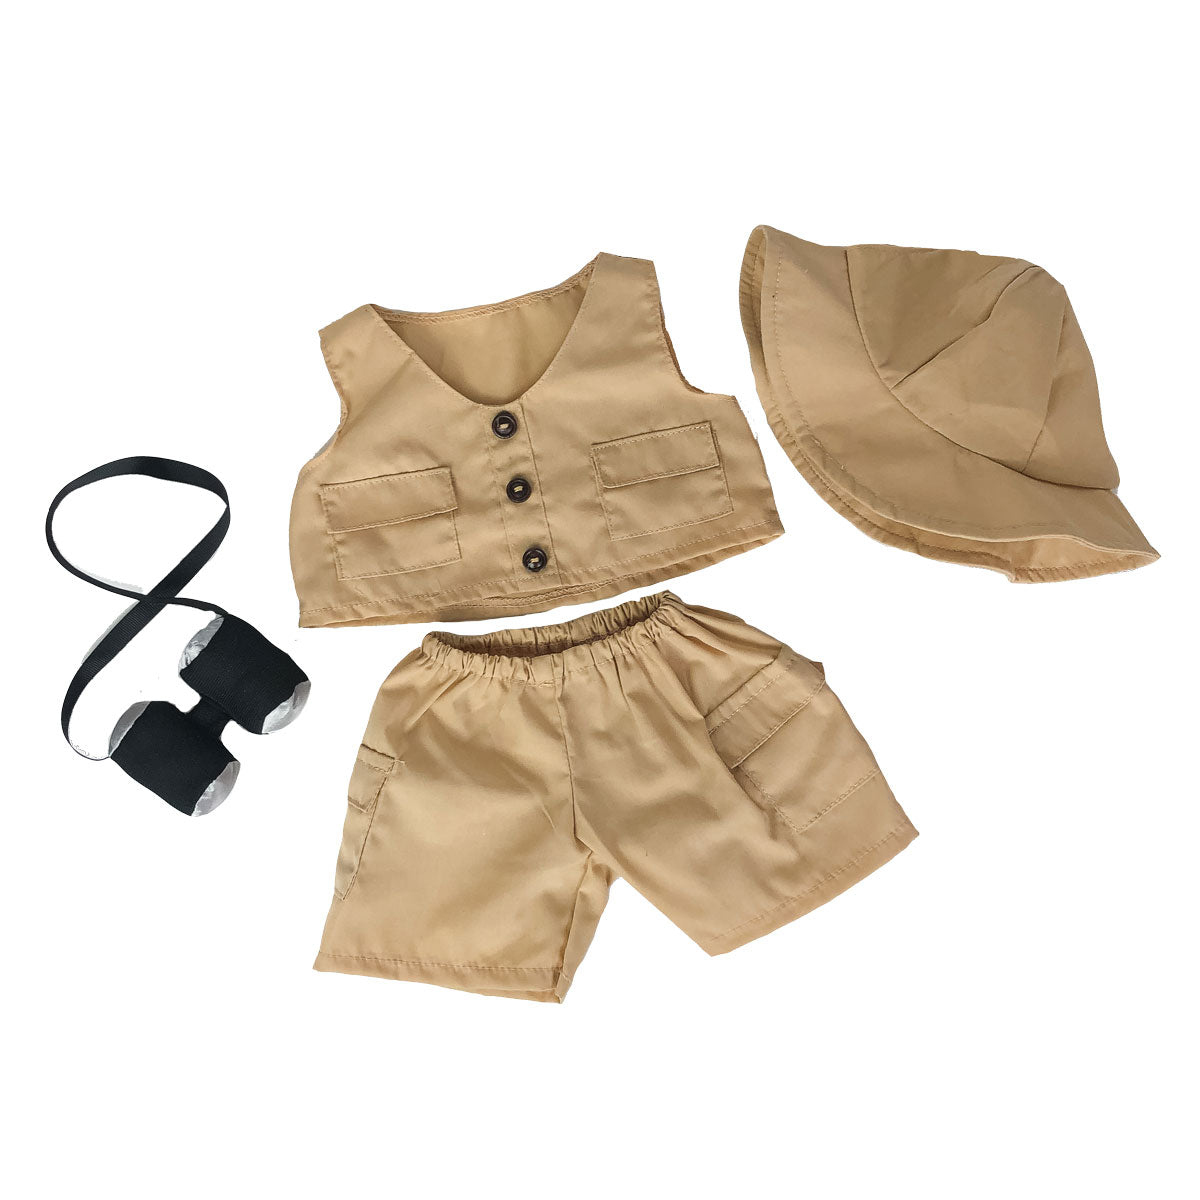 Safari outfit for 16 inch teddy bears and other 16 inch plush stuffed animals. Pretend play for toddlers and preschoolers.